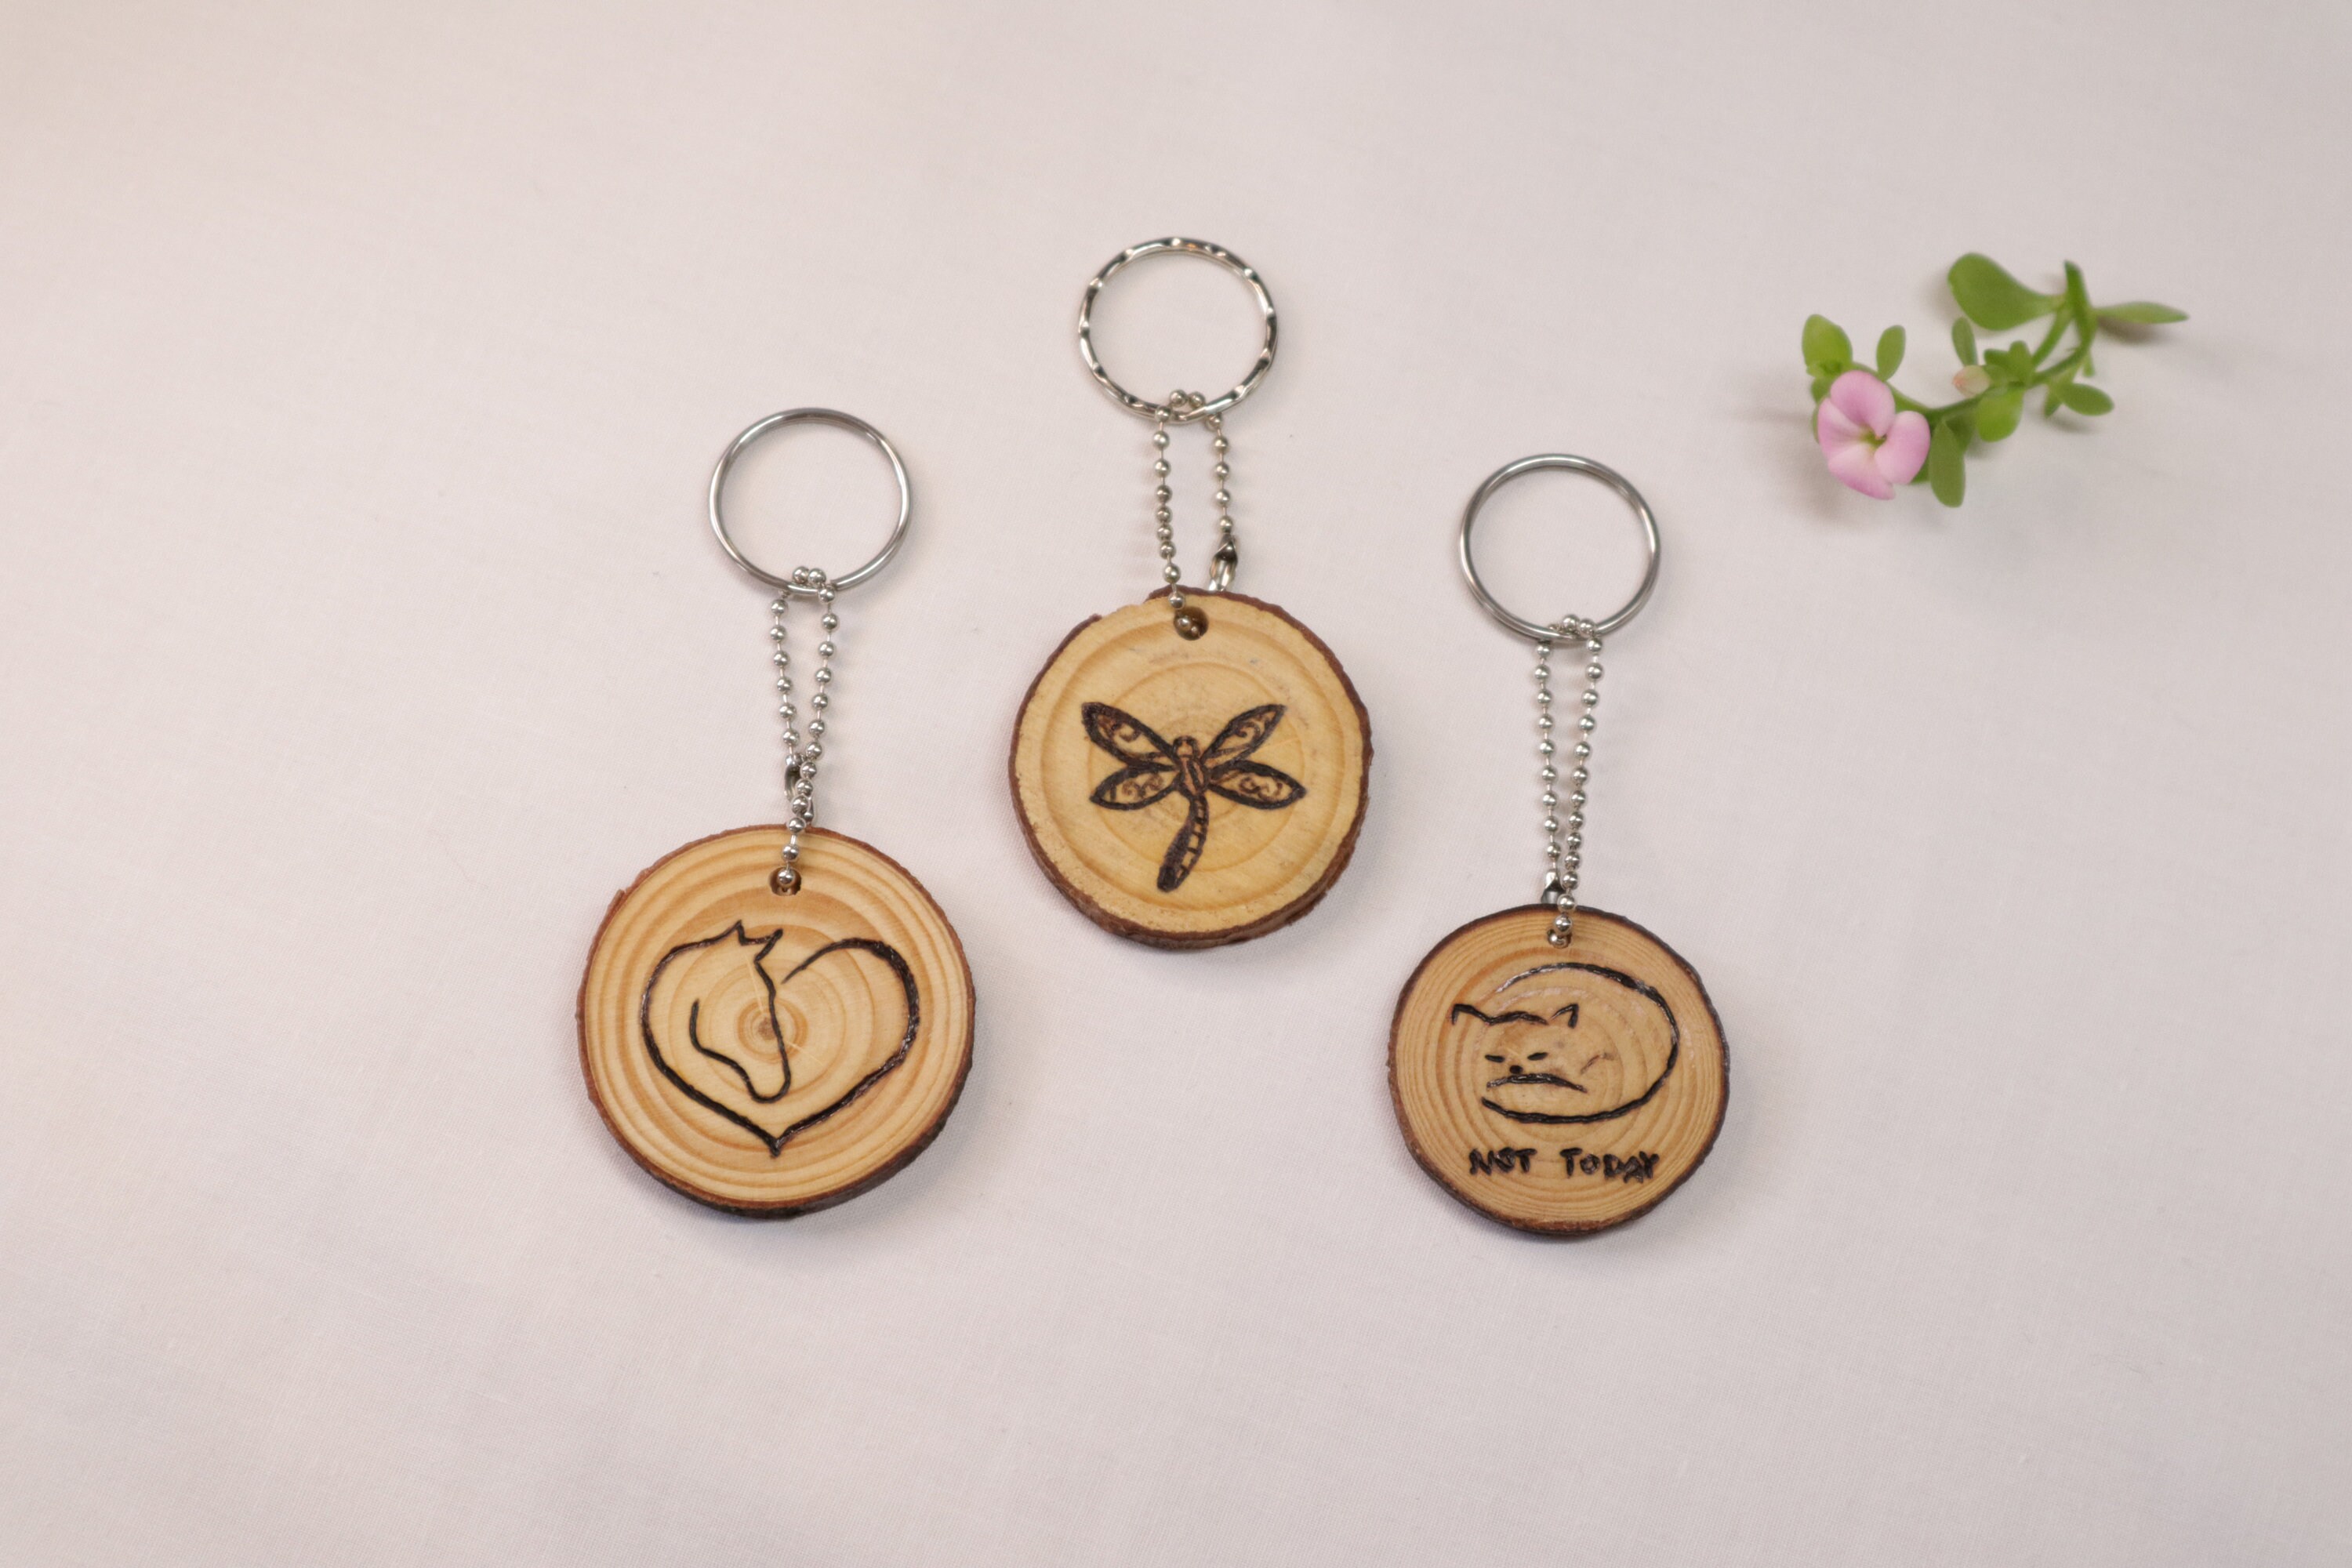 DIY Handmade Wooden Wooden Keychain Rings For Painting And Engraving Crafts  From Alley66, $9.57